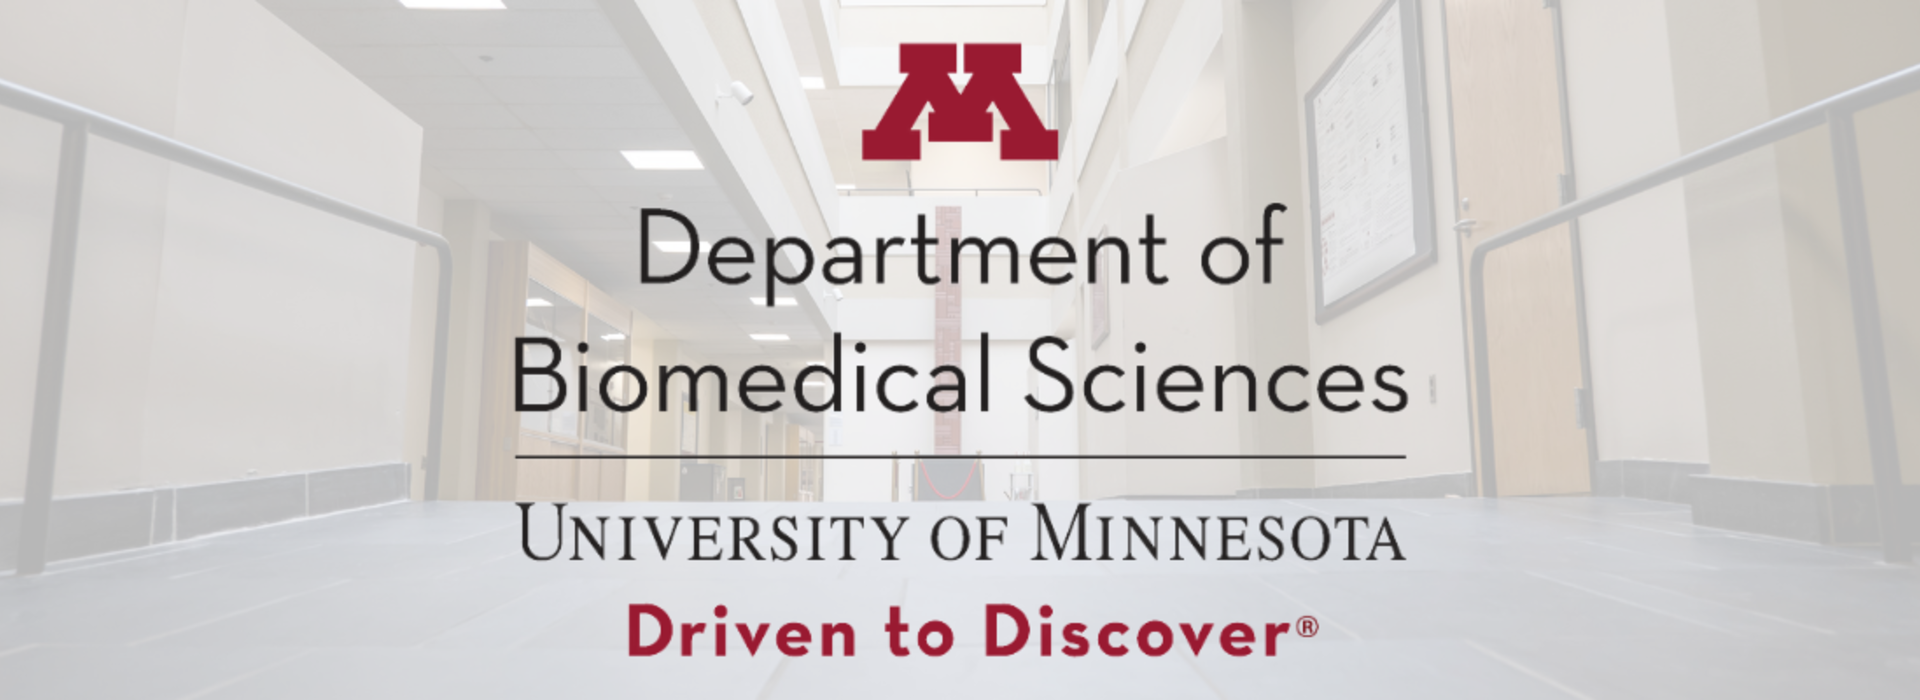 Biomedical Sciences Logo overlaid upon an image of the entrance to the medical school building